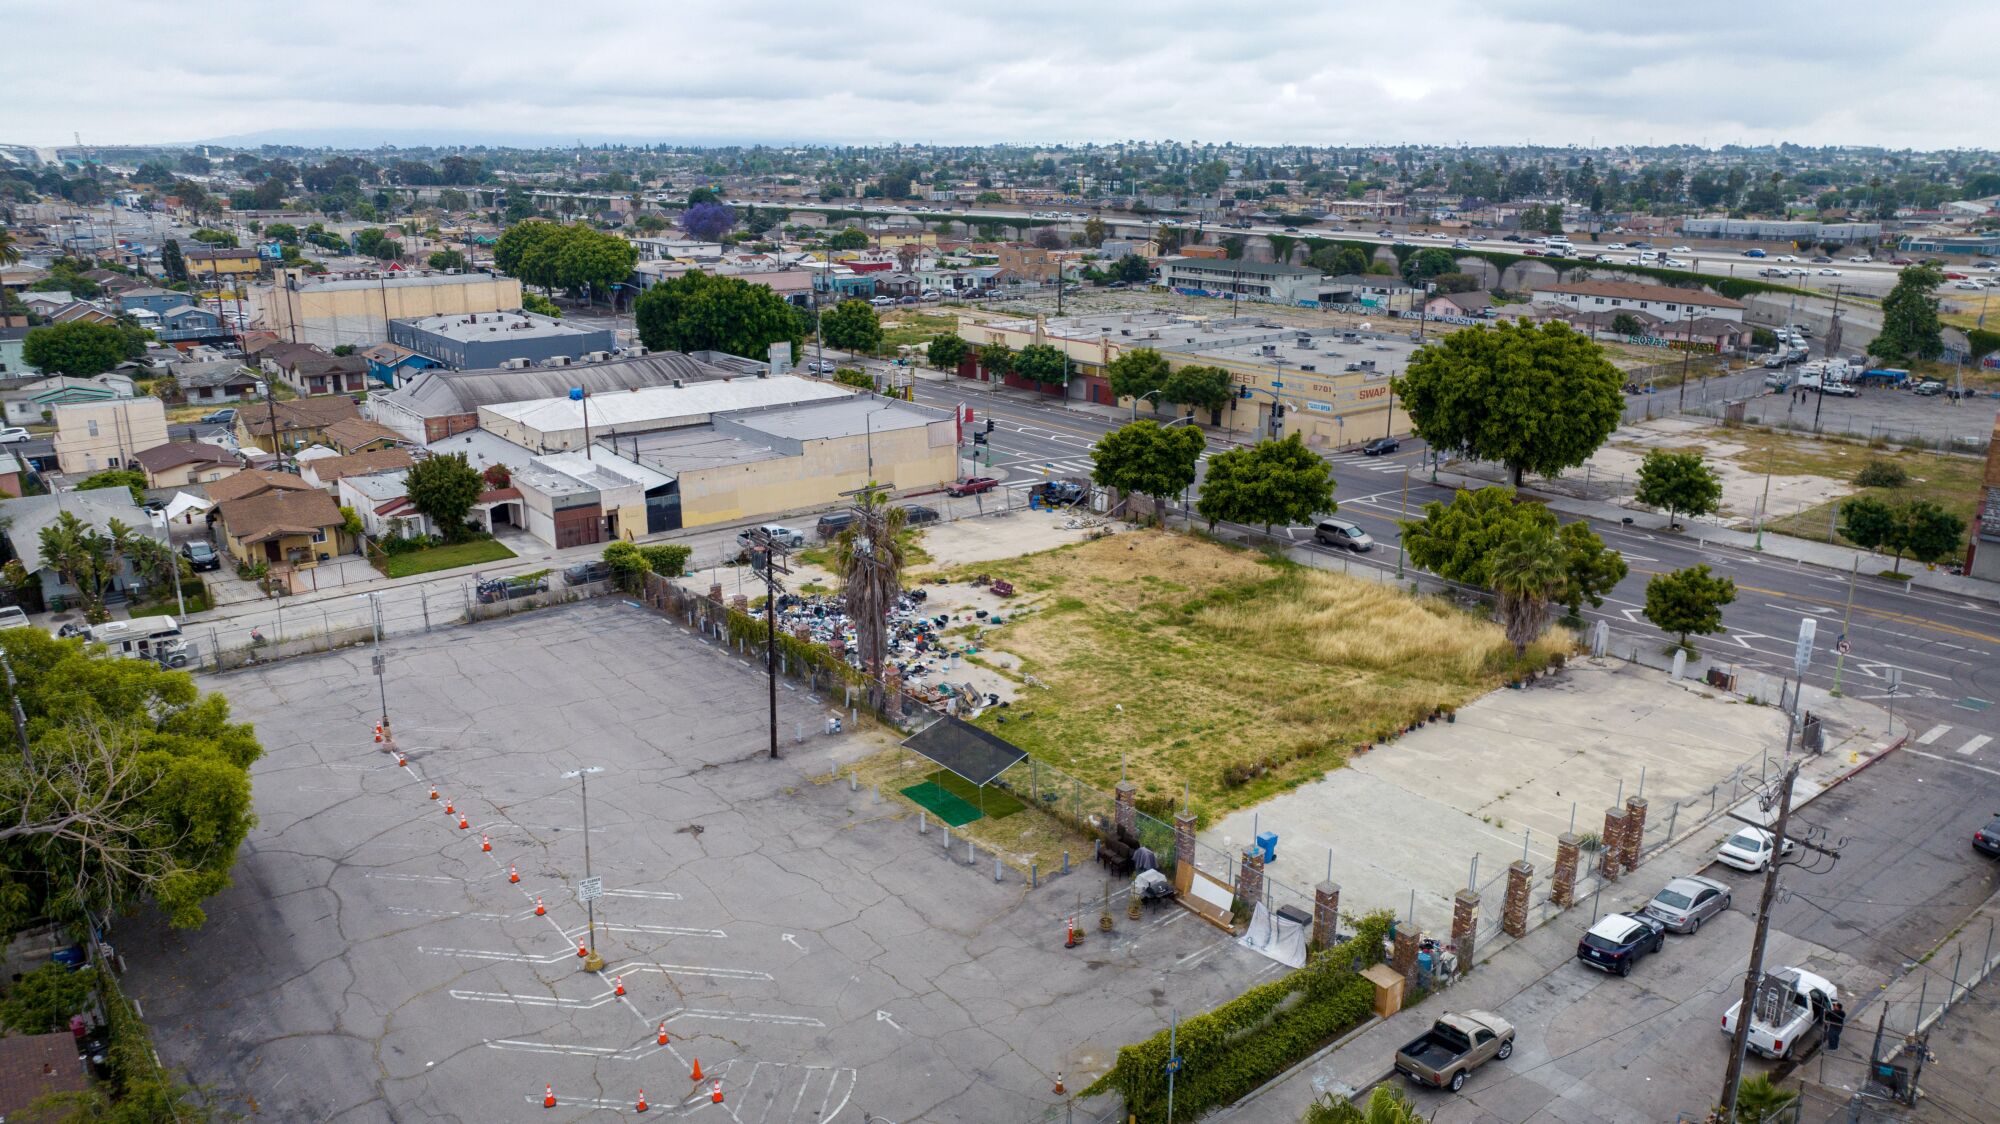 A civic group has identified a city parking lot near 87th St. and Broadway, left, as a potential site for homeless housing